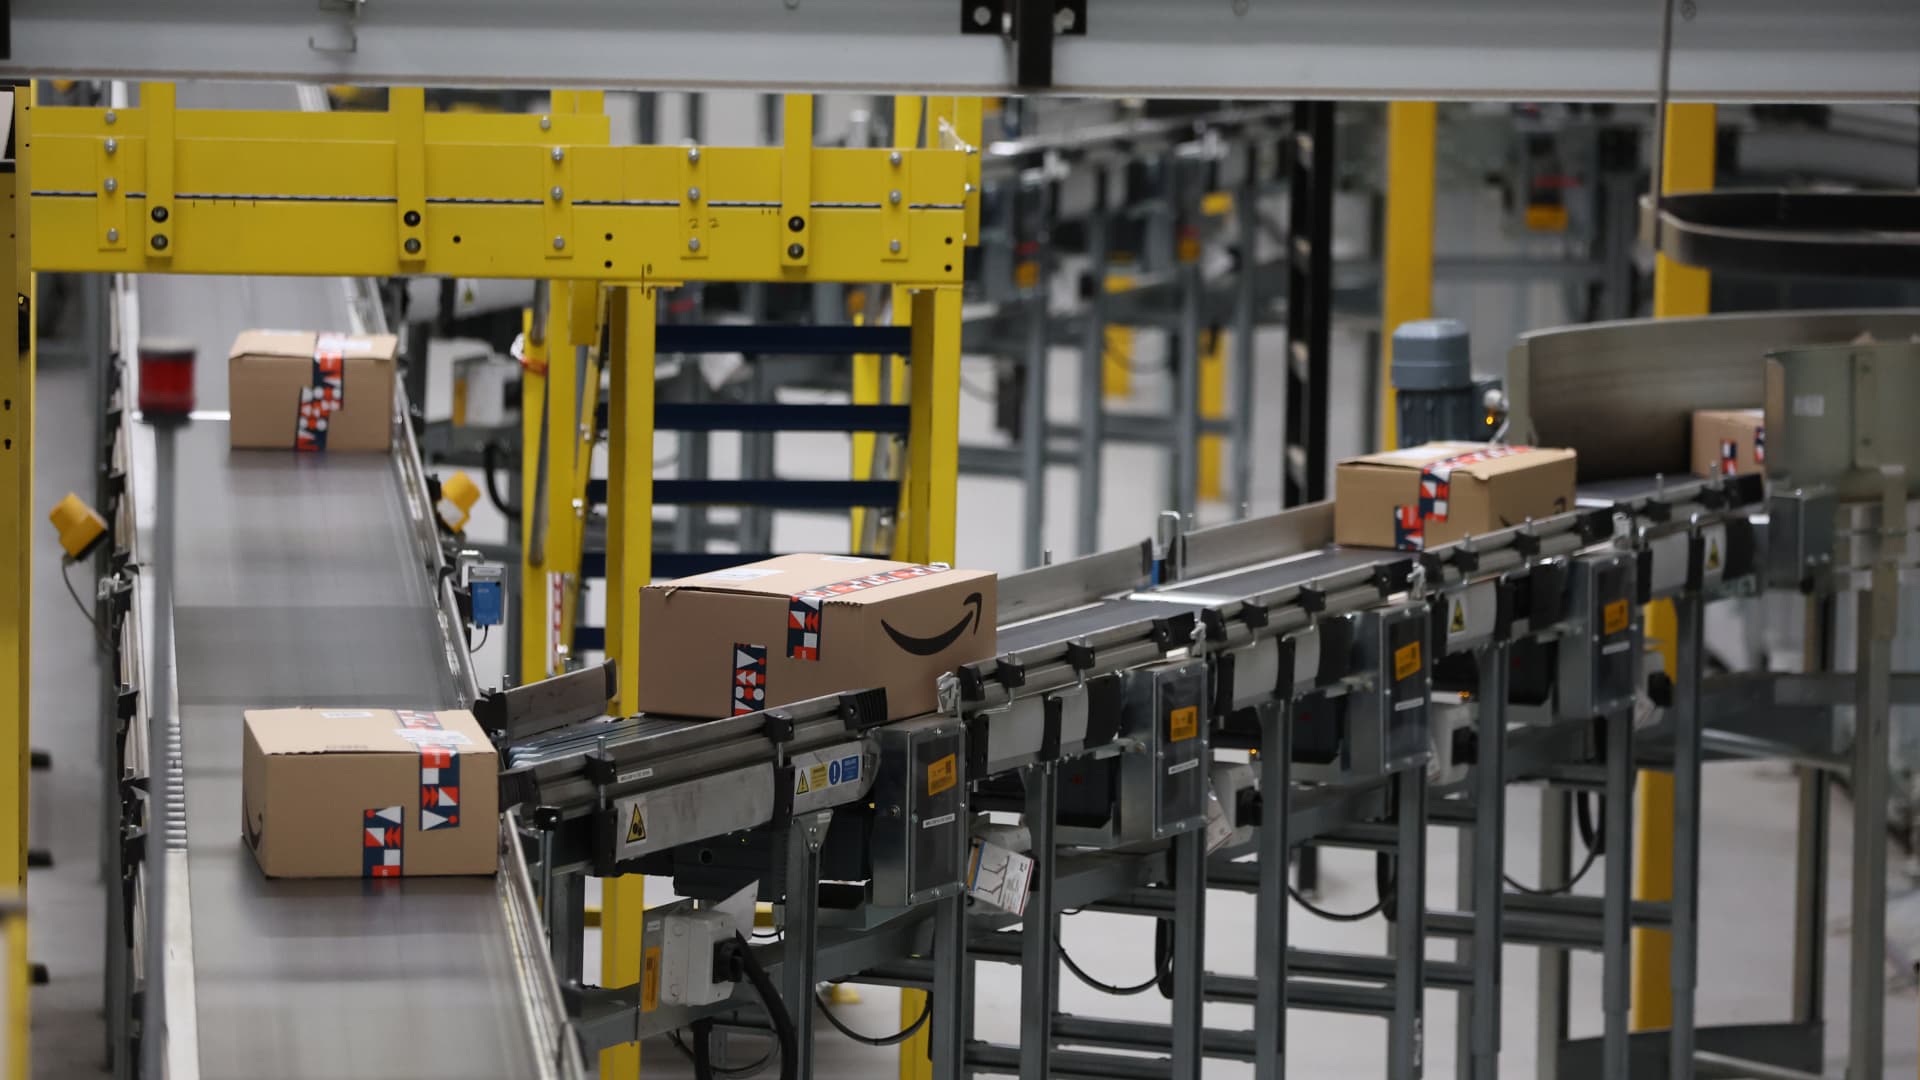 Amazon packages move on a conveyer belt at a fulfillment center in England.